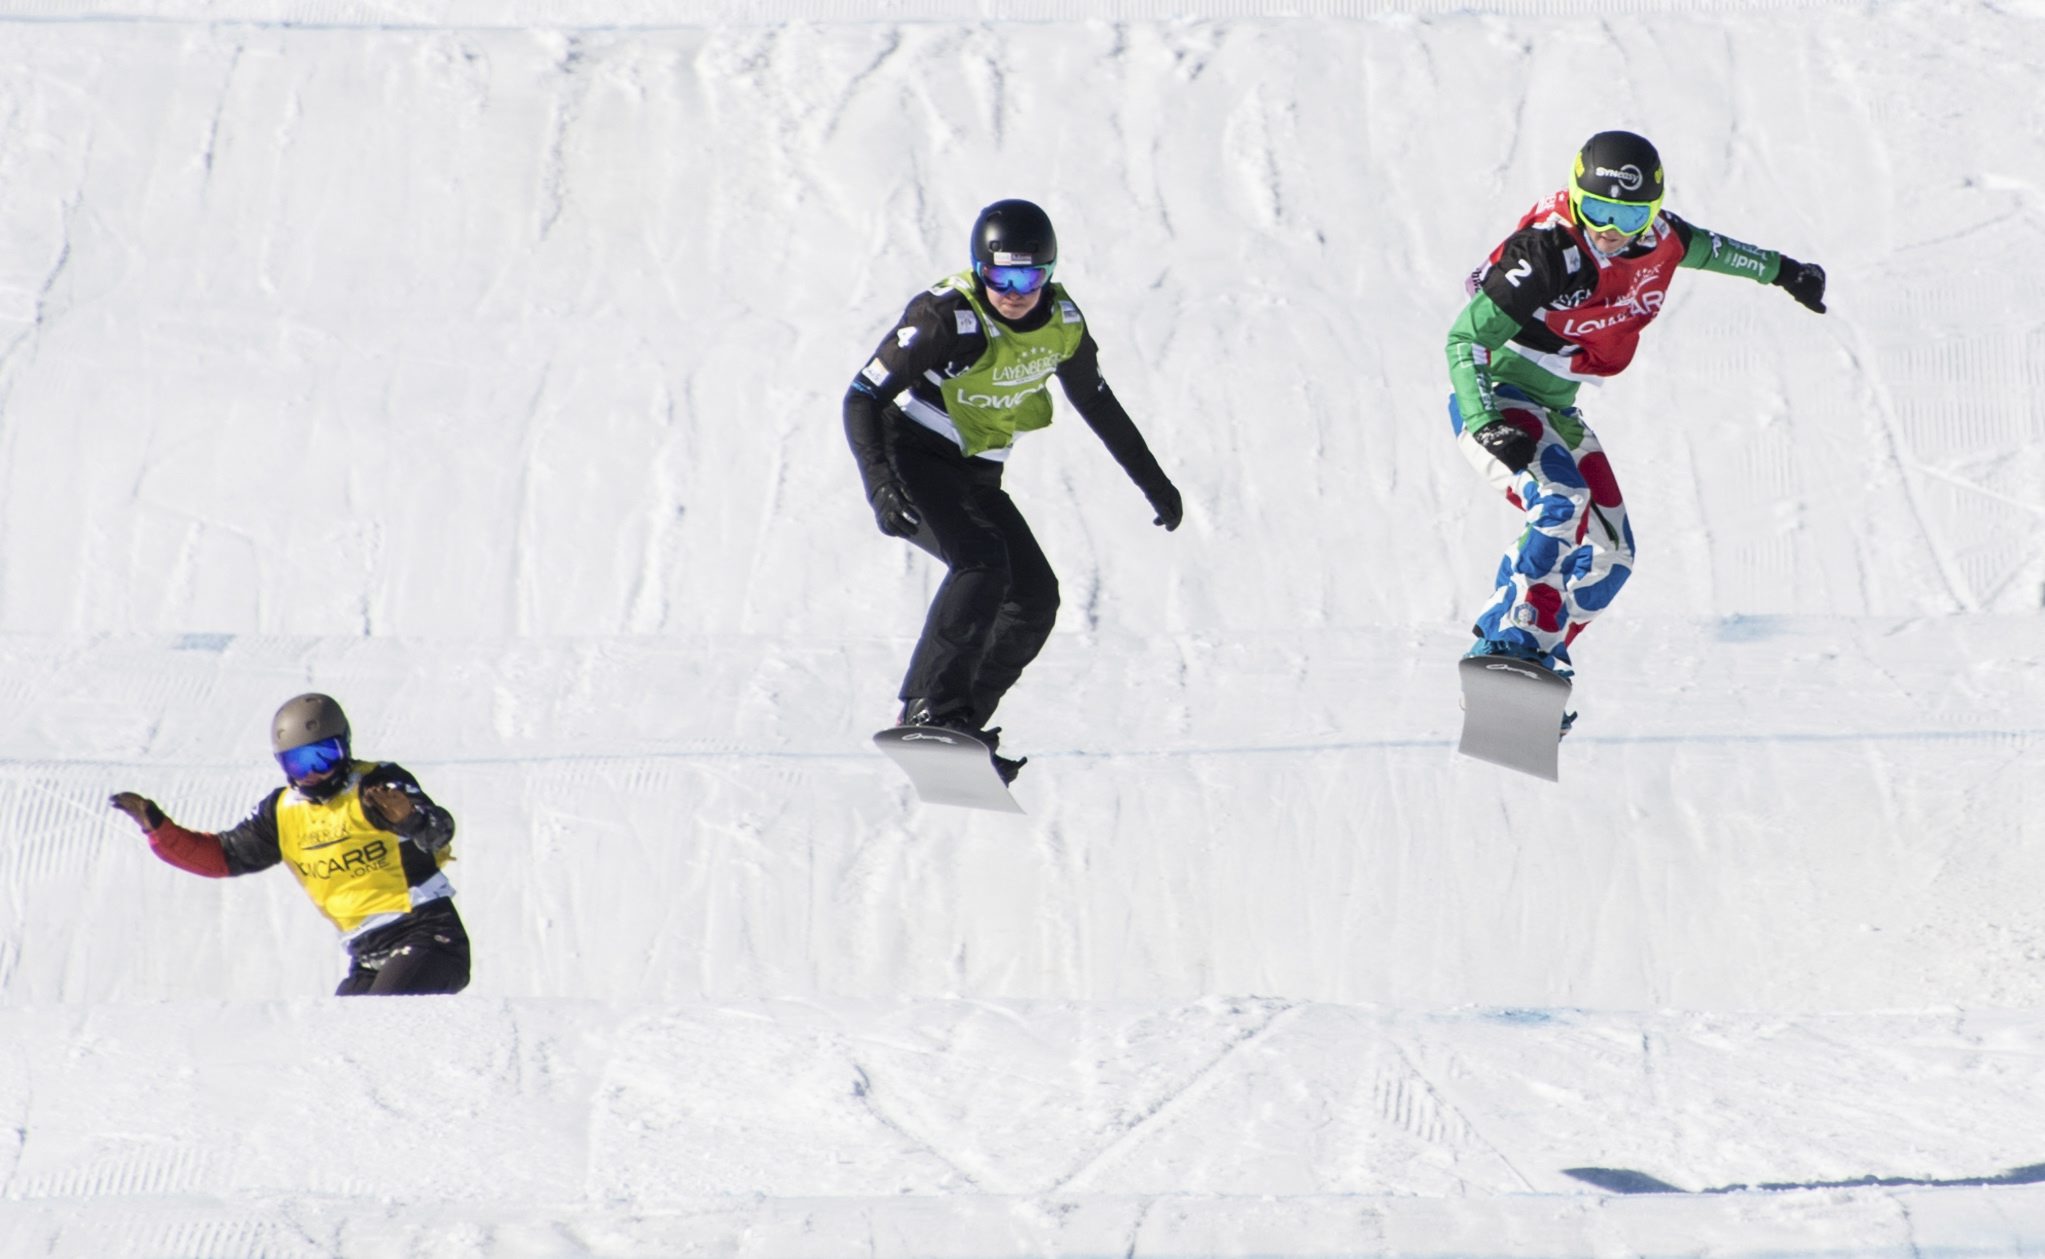 Winner Michaela Moioli from Italy, right, second placed Belle Brockhoff from Australia, center, (2nd place, c) and third placed Meryeta Odine from Canada, left, speed down the track during the Ladies' Snowboard Cross World Cup at Feldberg mountain in the Black Forest region, Germany,, Saturday, Feb. 11, 2017. ( Patrick Seeger/dpa via AP)